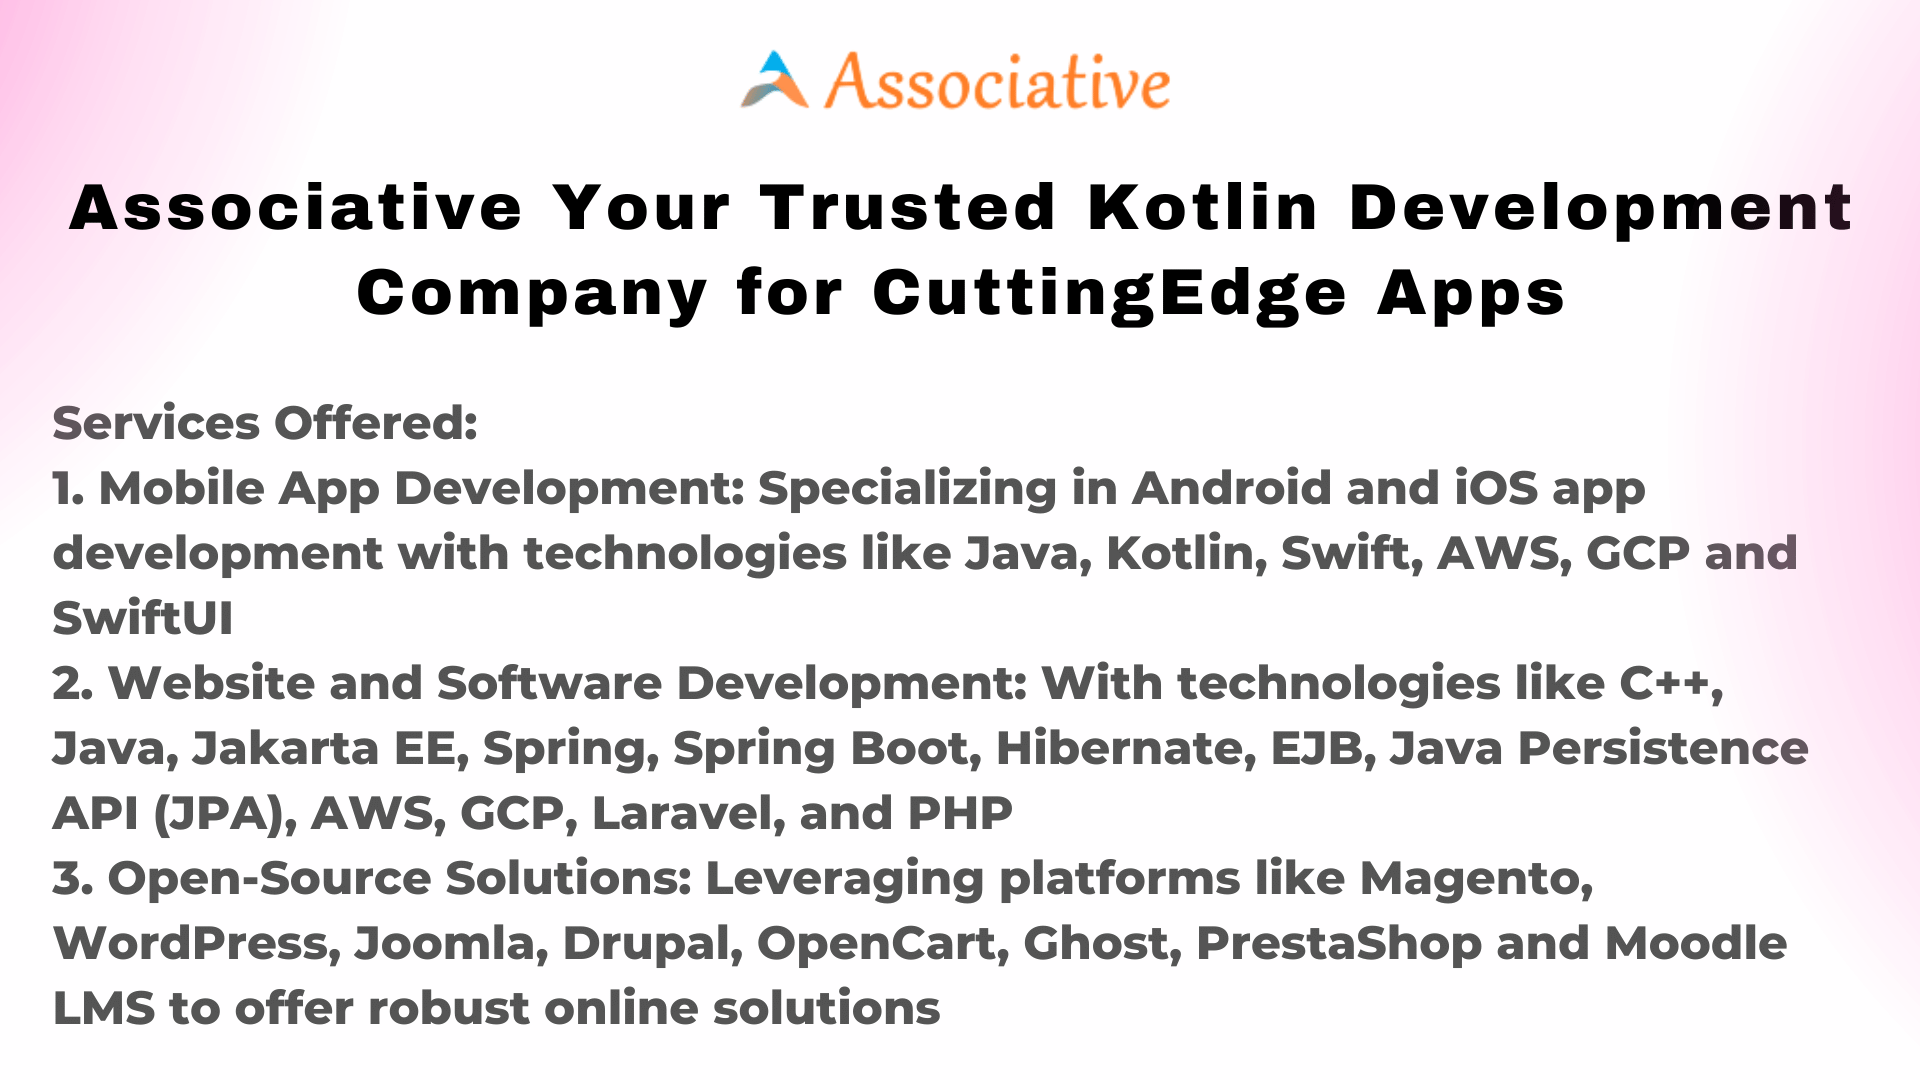 Associative Your Trusted Kotlin Development Company for Cutting Edge Apps